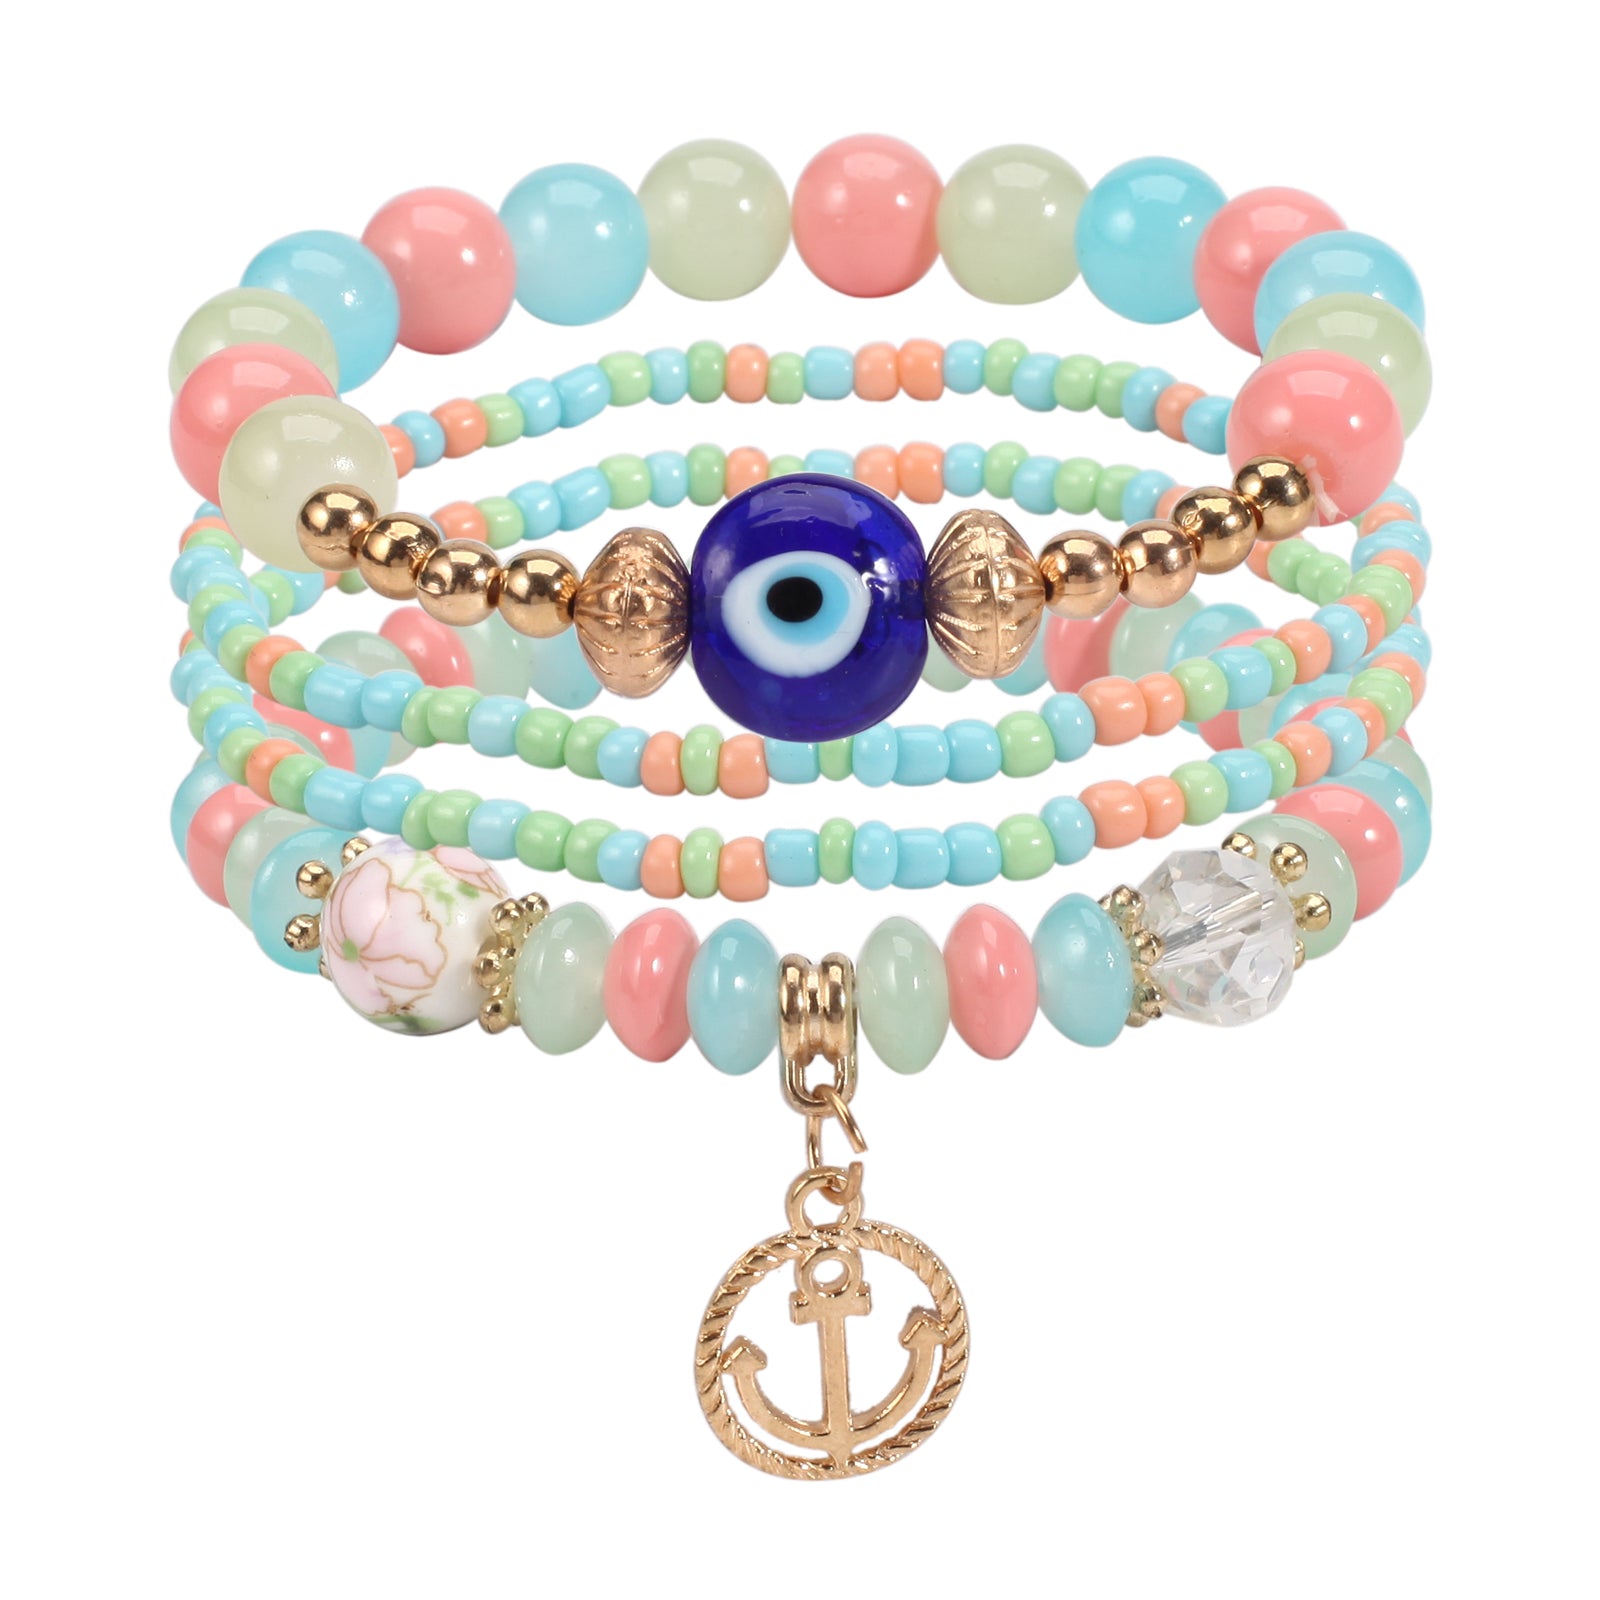 Boho Style Multilayer Beaded Bracelet with Anchor Pendant - Perfect for Summer Beach Clothing and Jewelry Decor